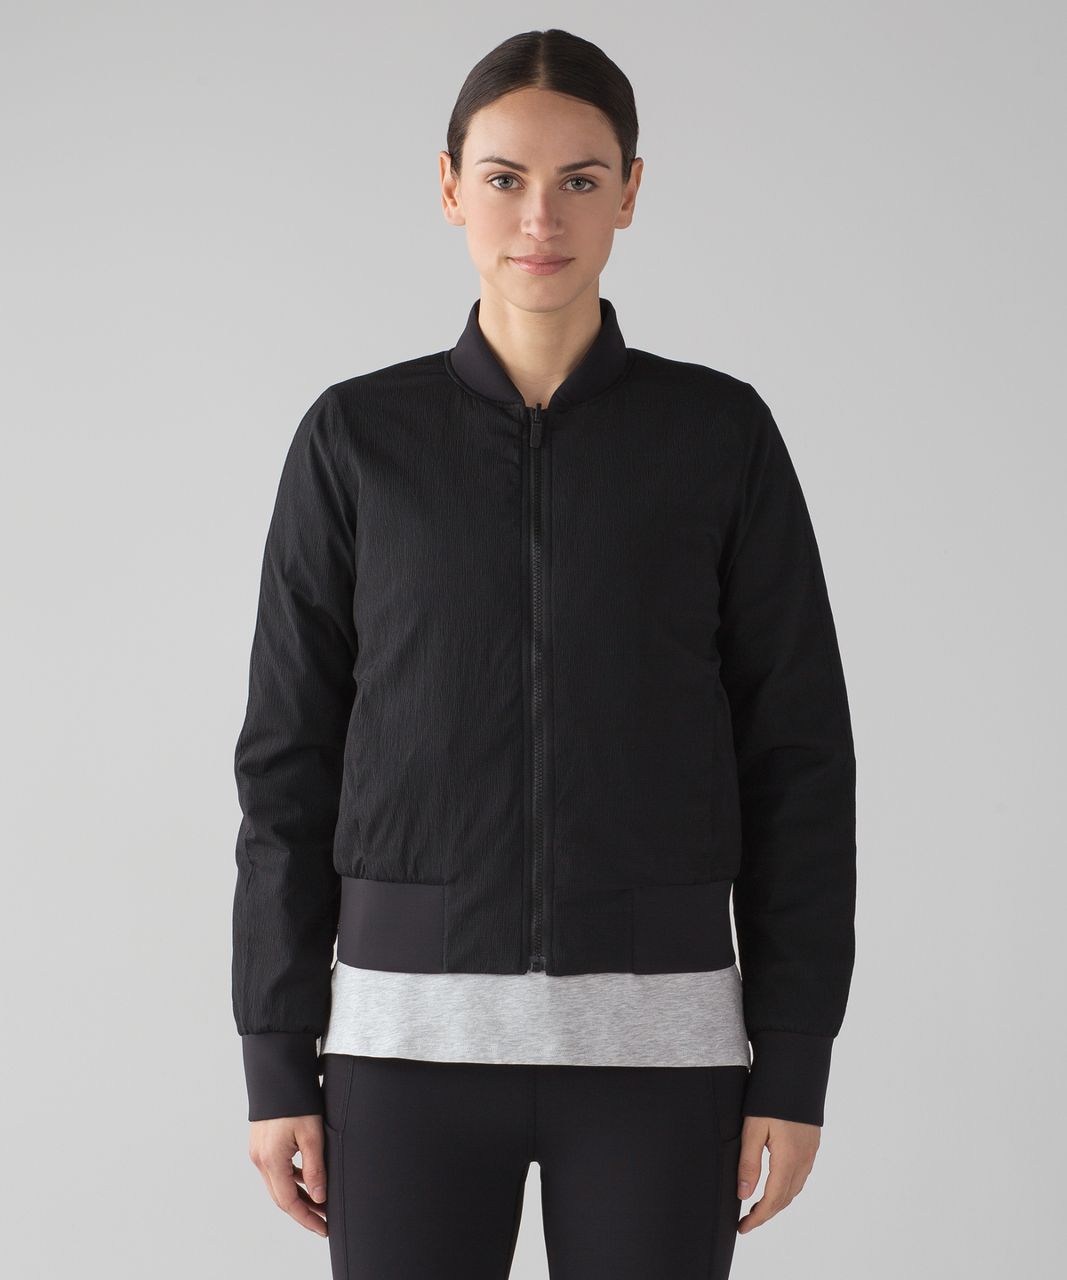 shoppers say this reversible puffer jacket is an affordable version  of Lululemon's Bomber